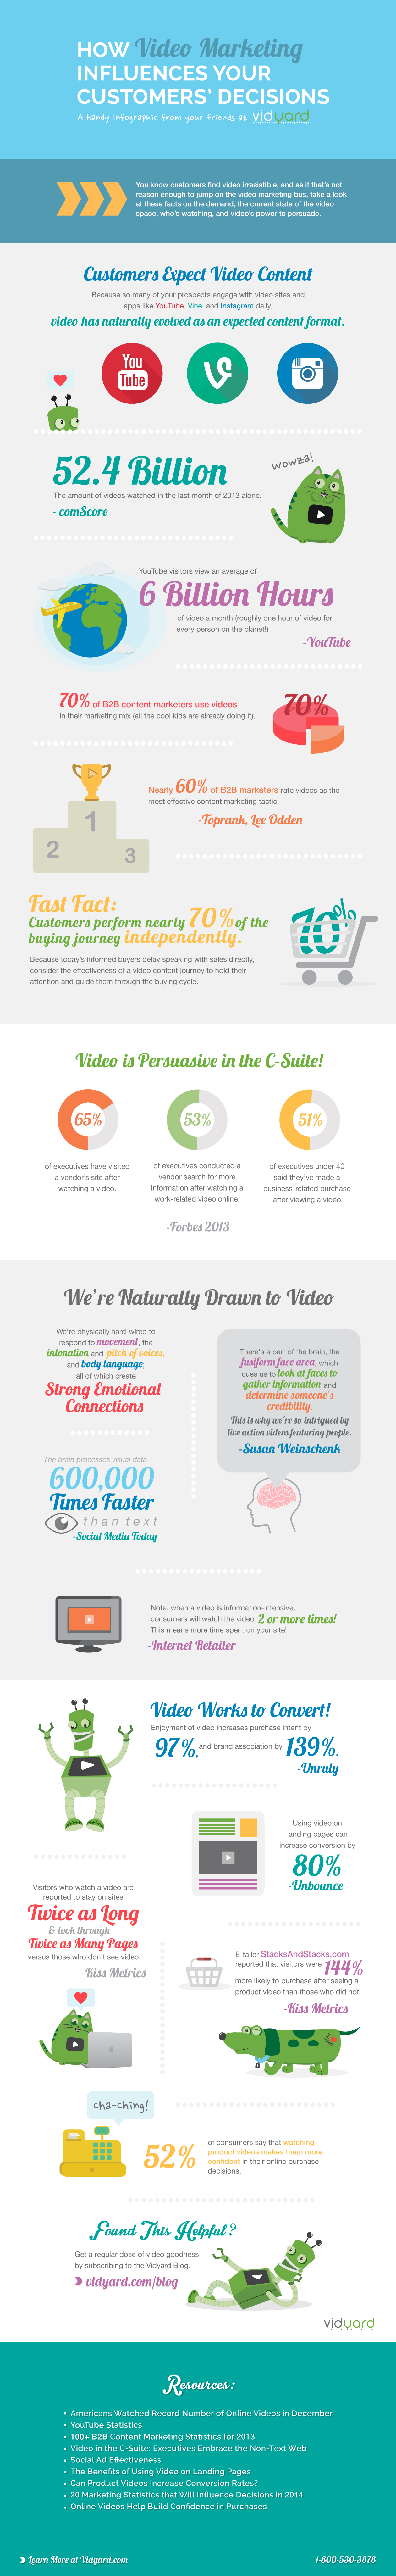 How Video Marketing Influences Your Customers